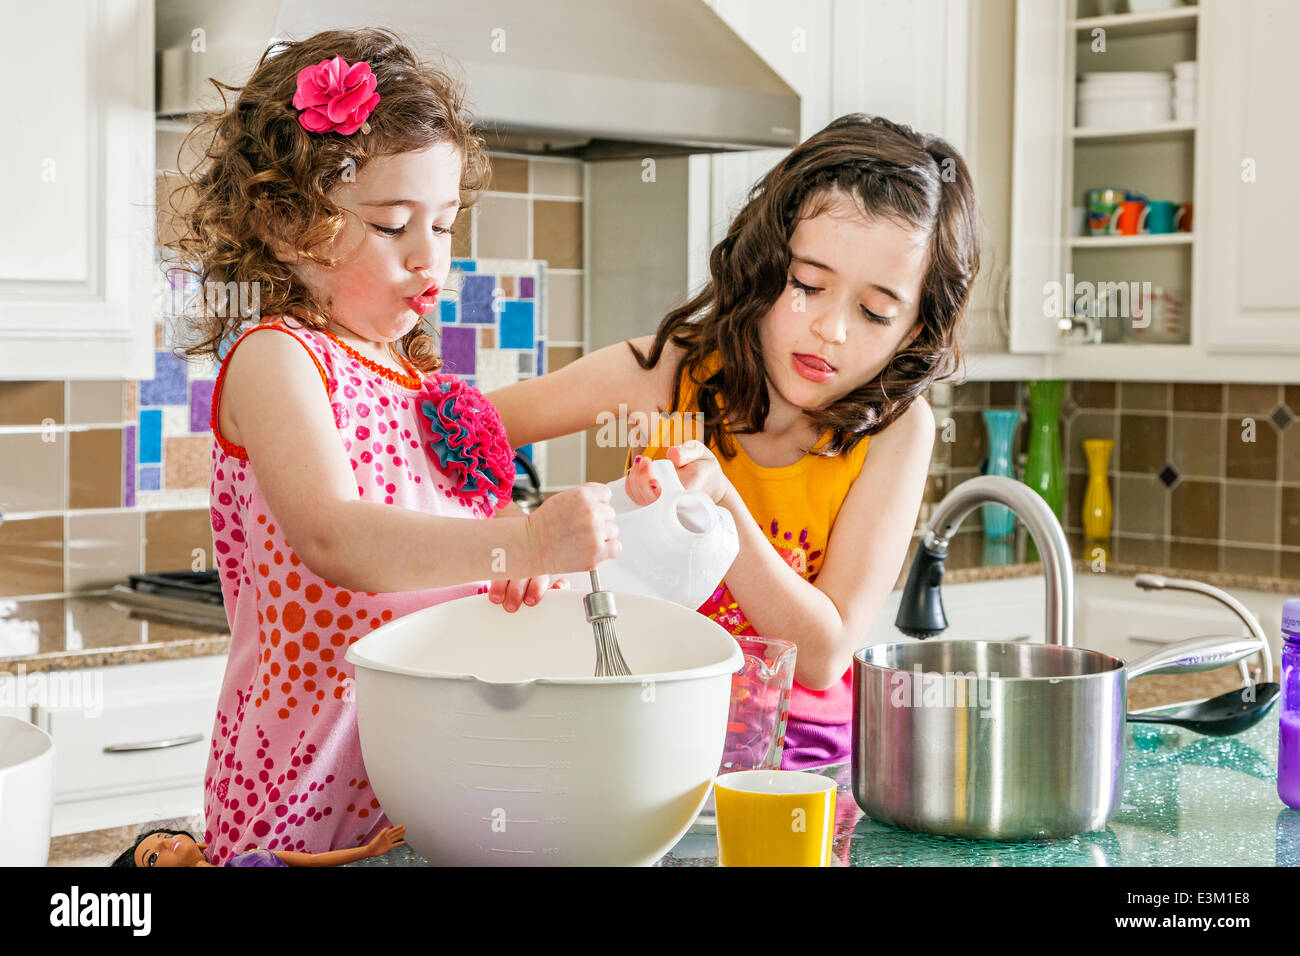 Two girls (4-5, 8-9) cooking together Stock Photo